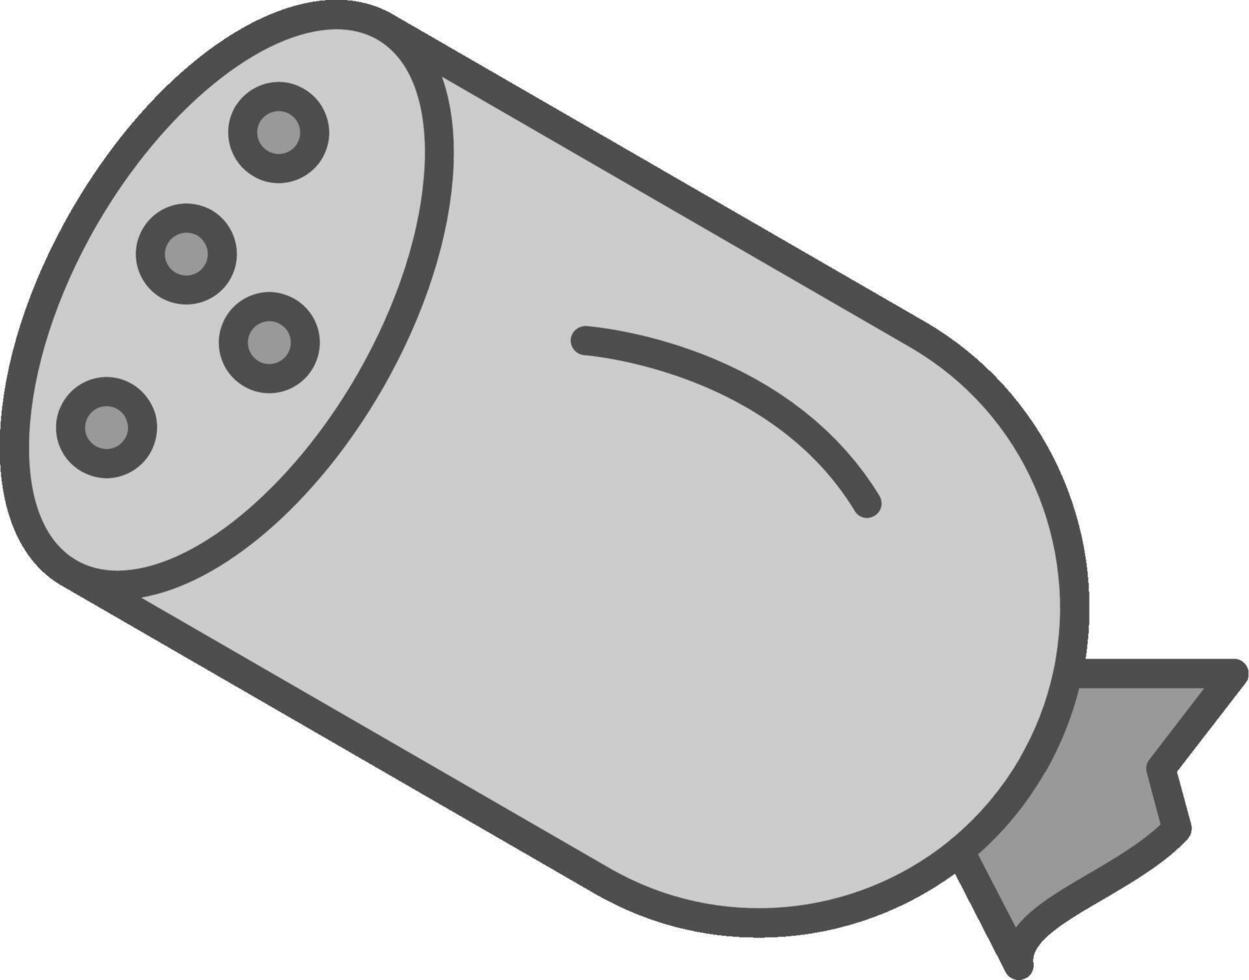 Salami Line Filled Greyscale Icon Design vector